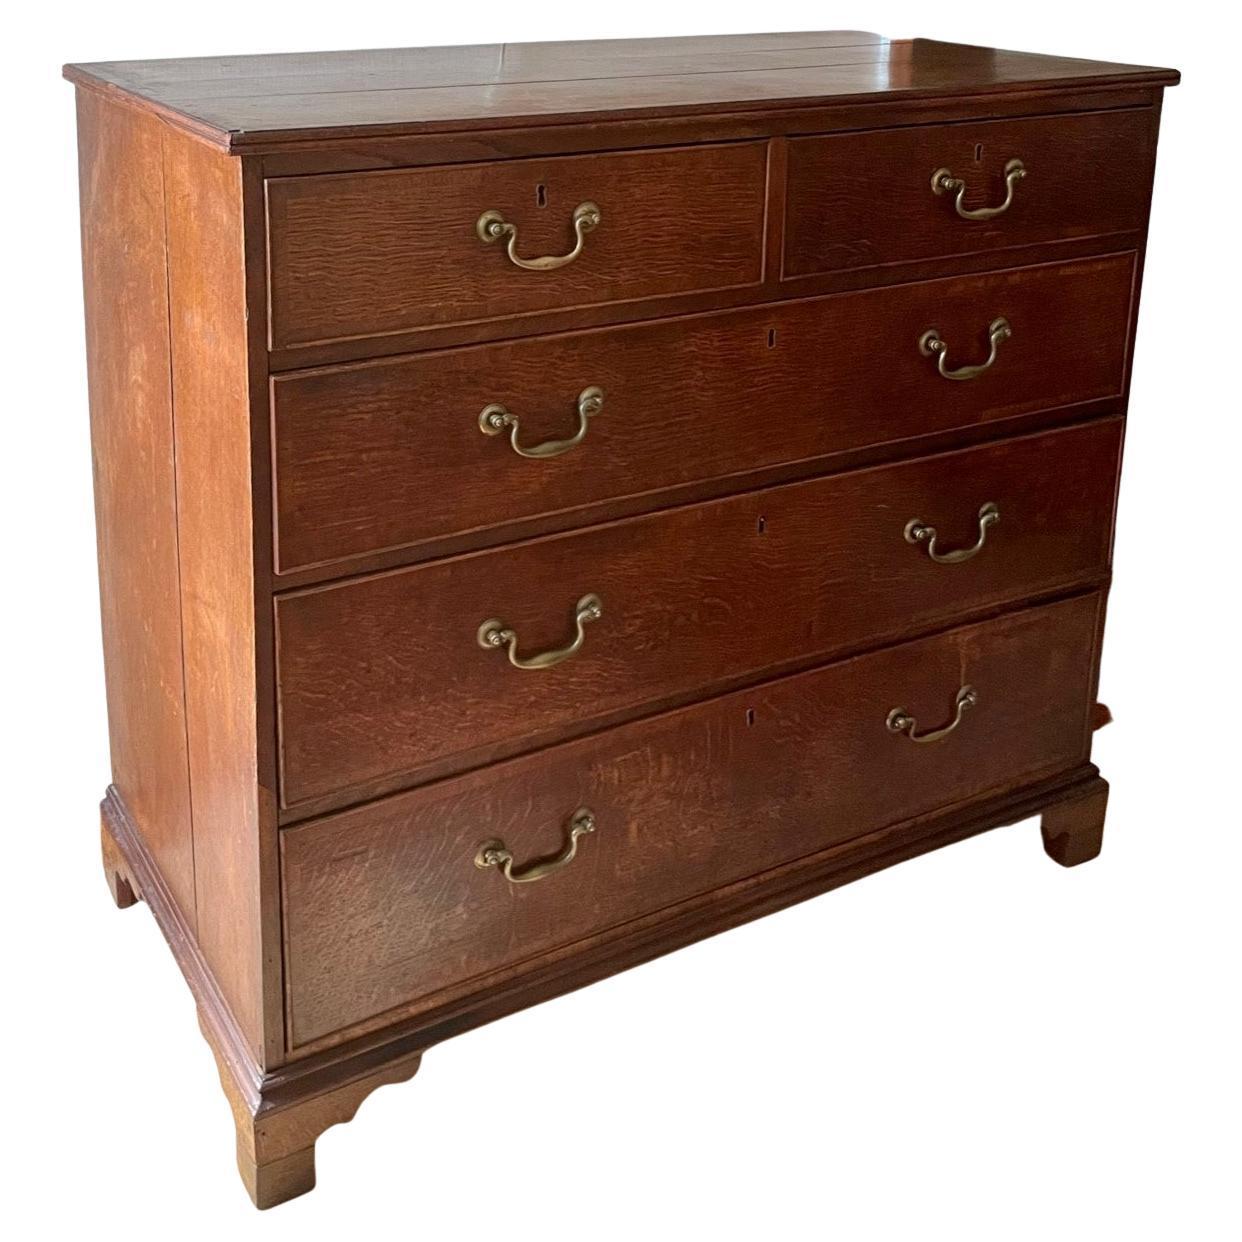 18th Century George Lll Oak Chest of Drawers with Original Hardware 11